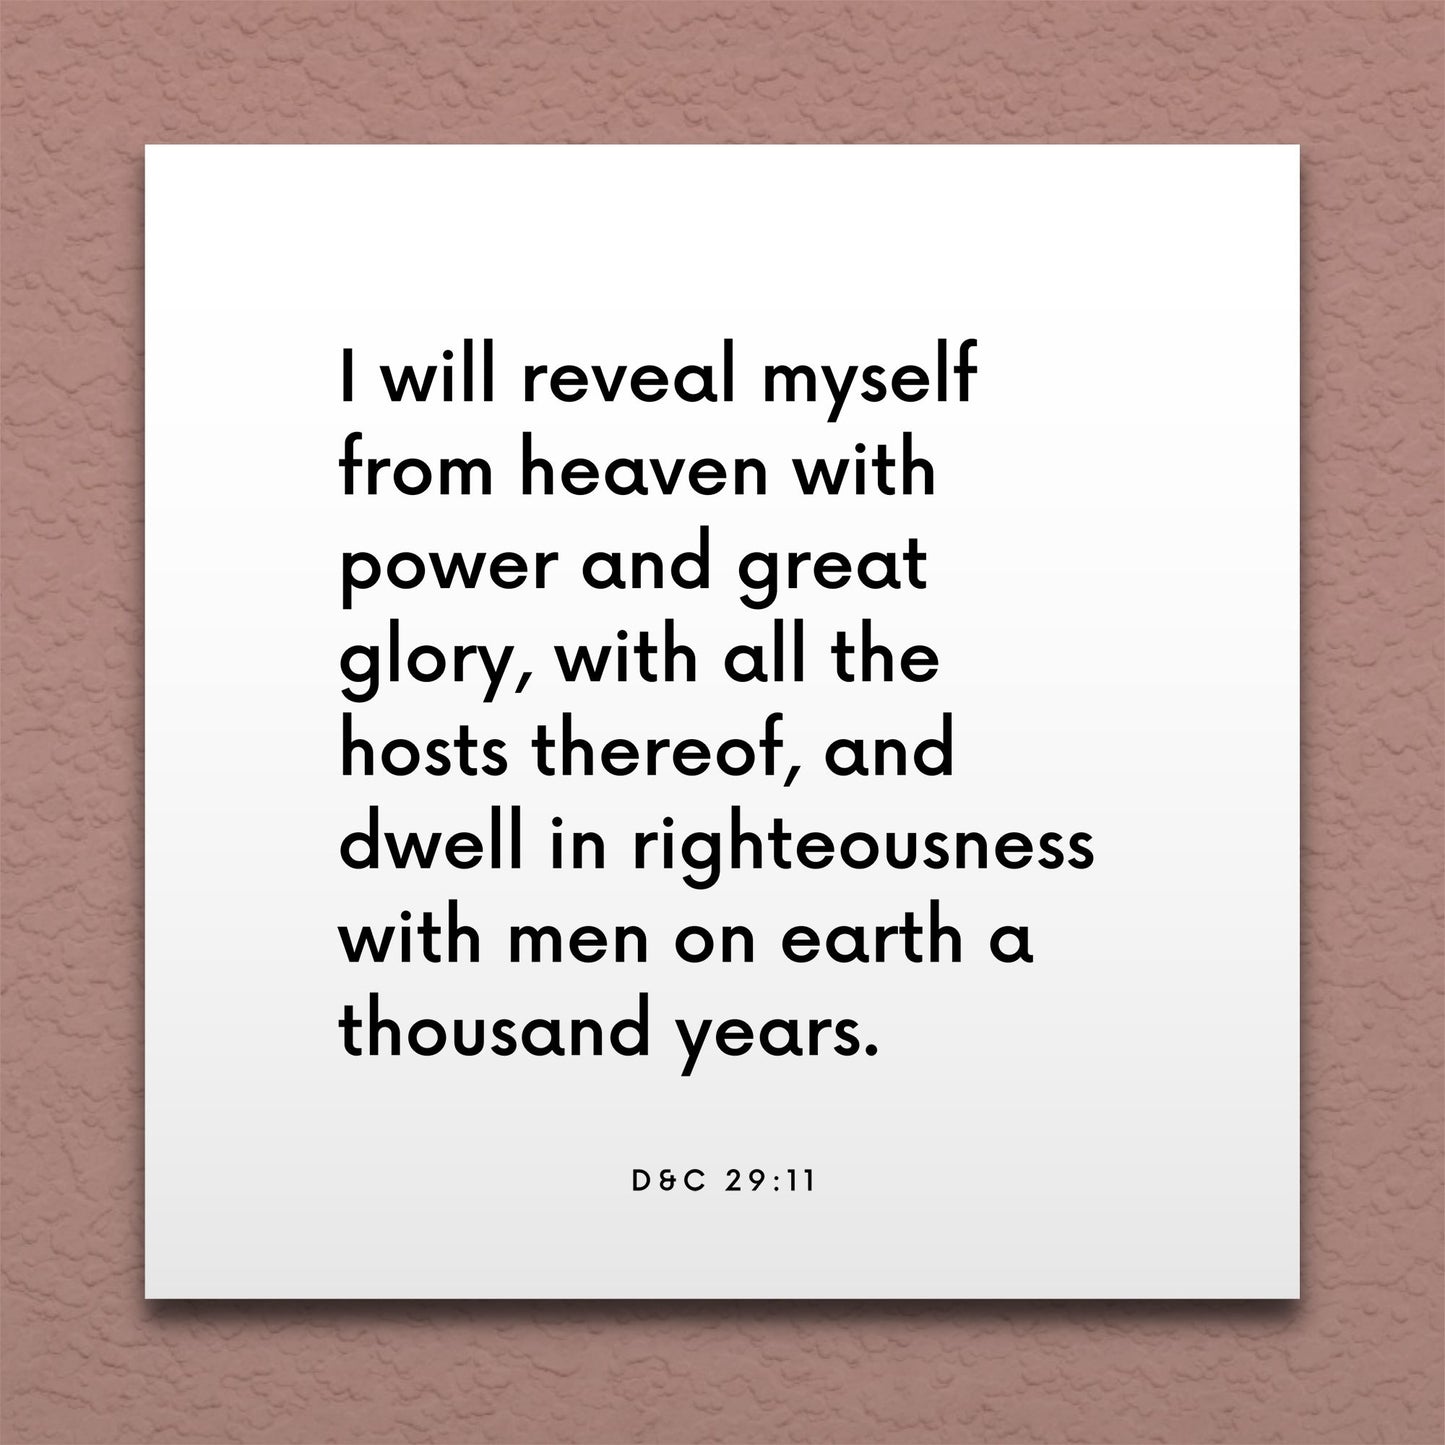 Wall-mounted scripture tile for D&C 29:11 - "I will reveal myself from heaven"